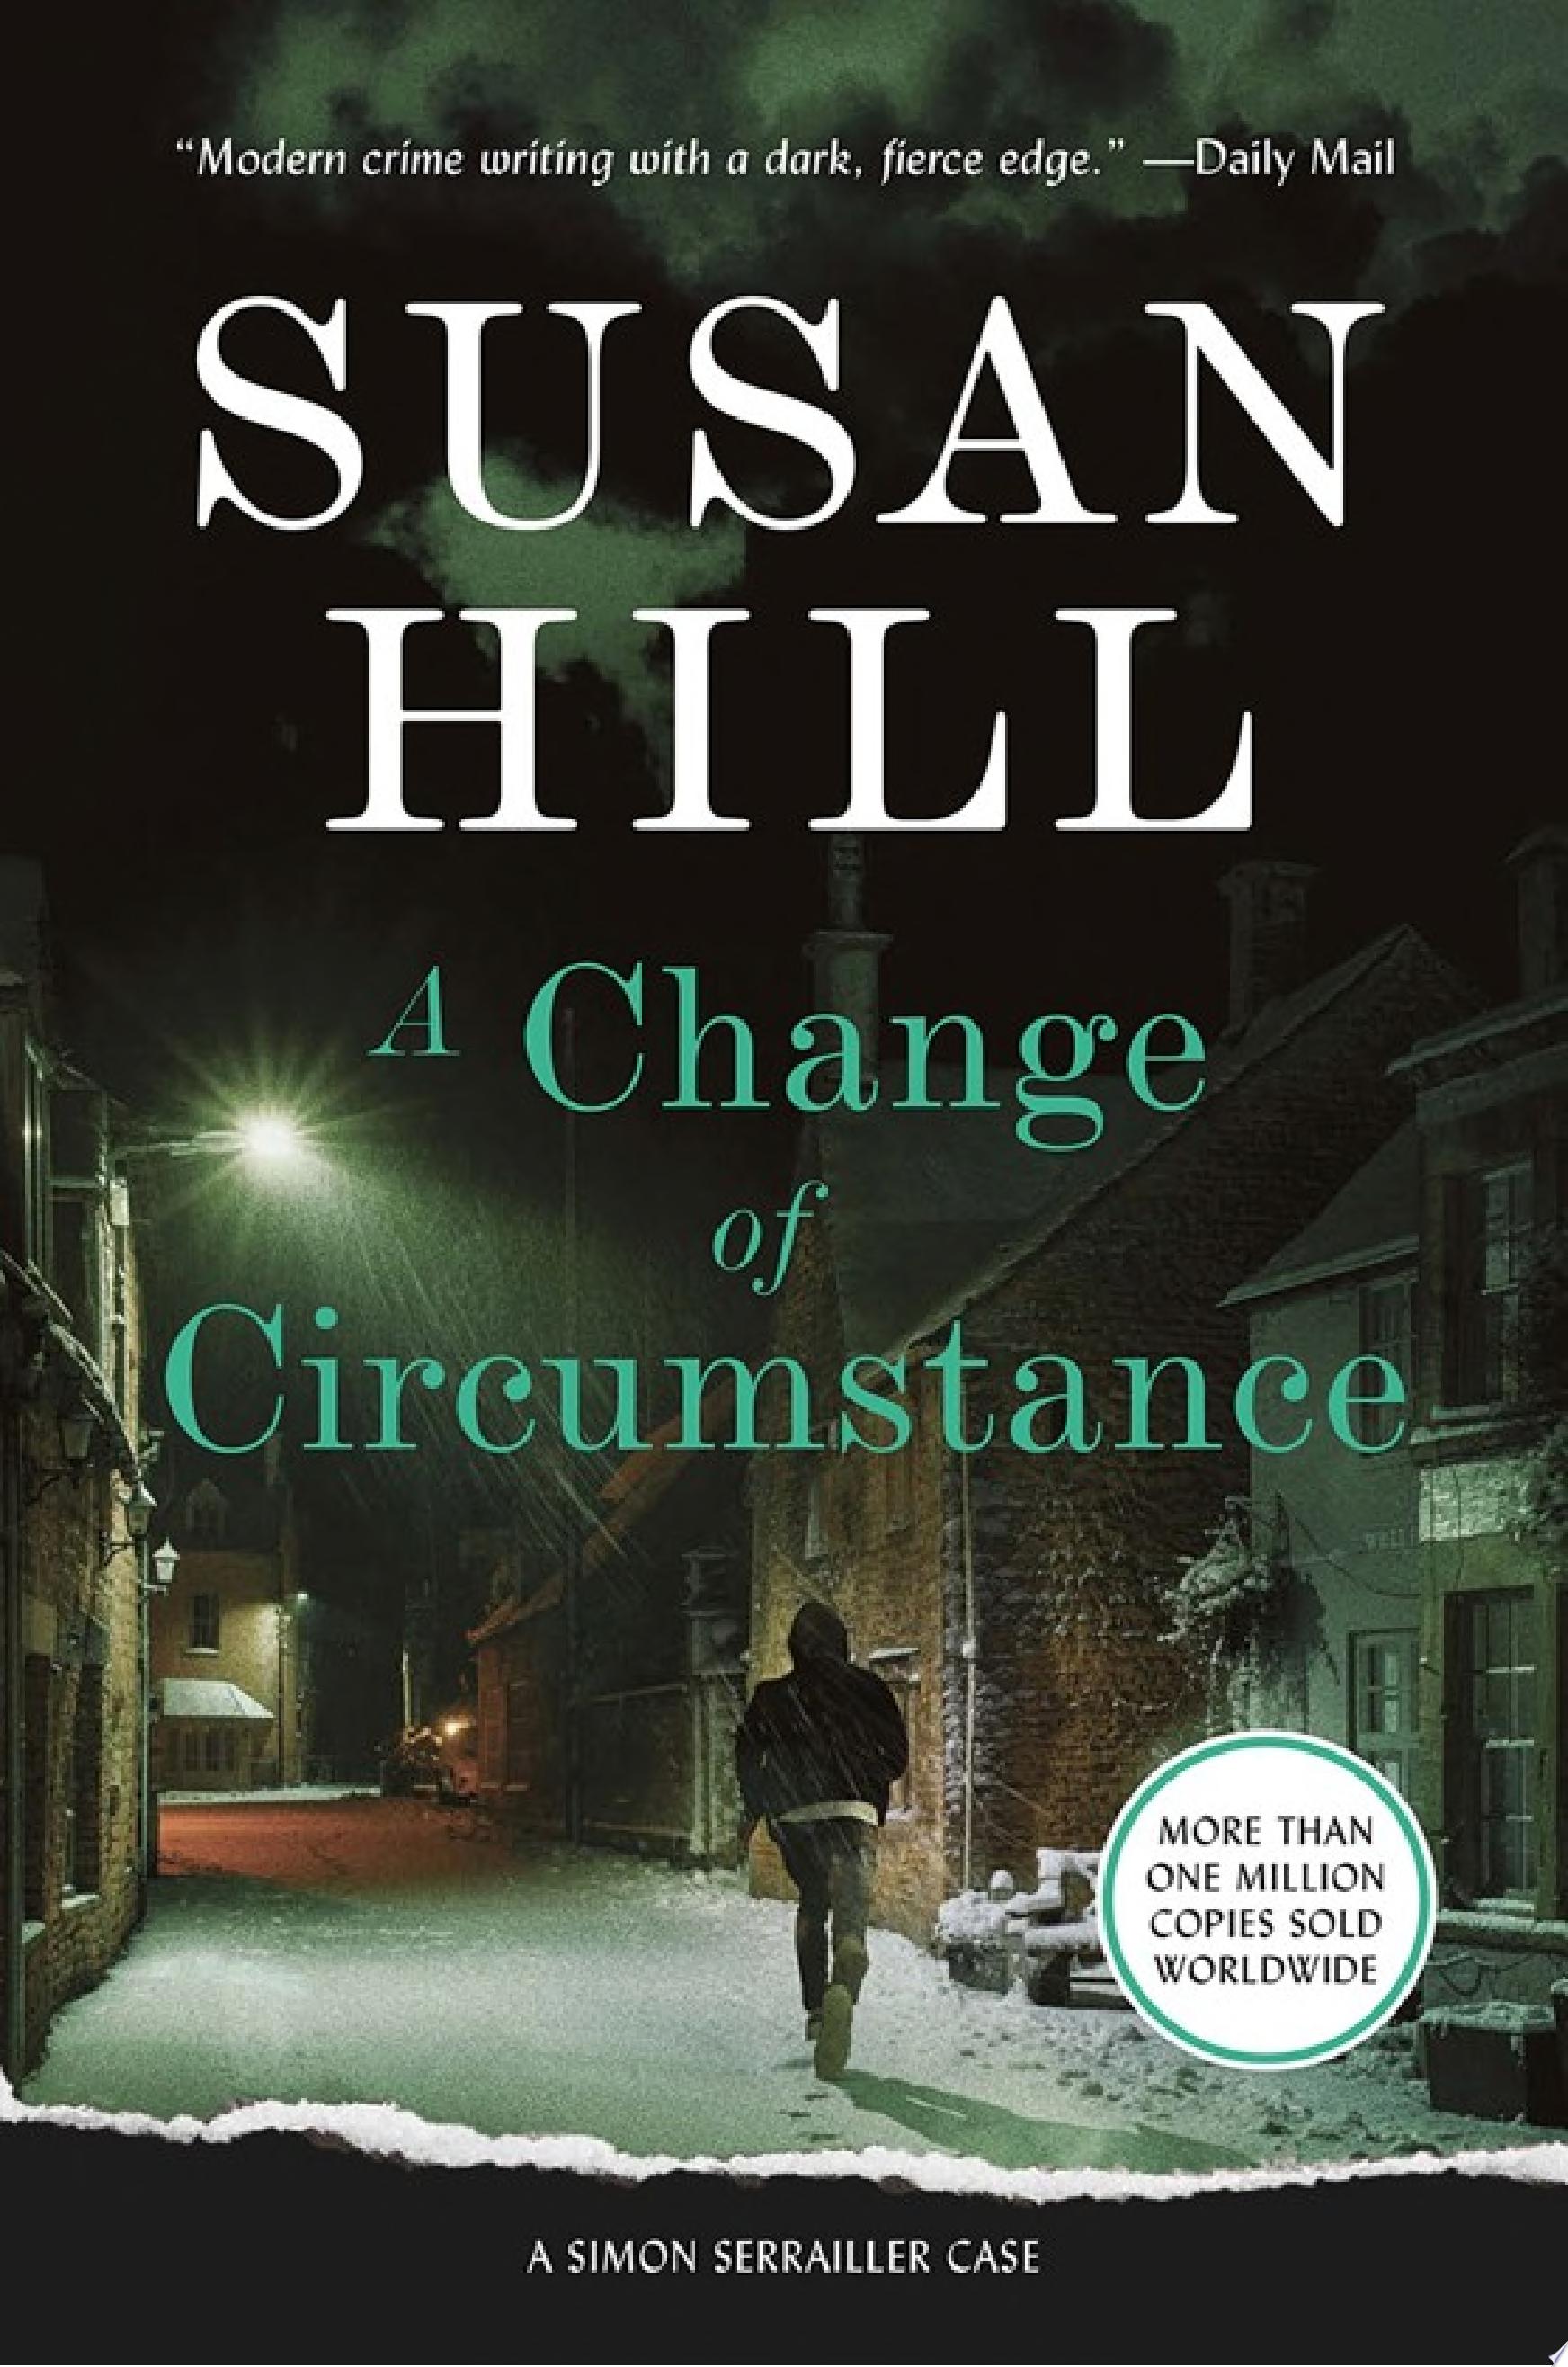 Image for "A Change of Circumstance"